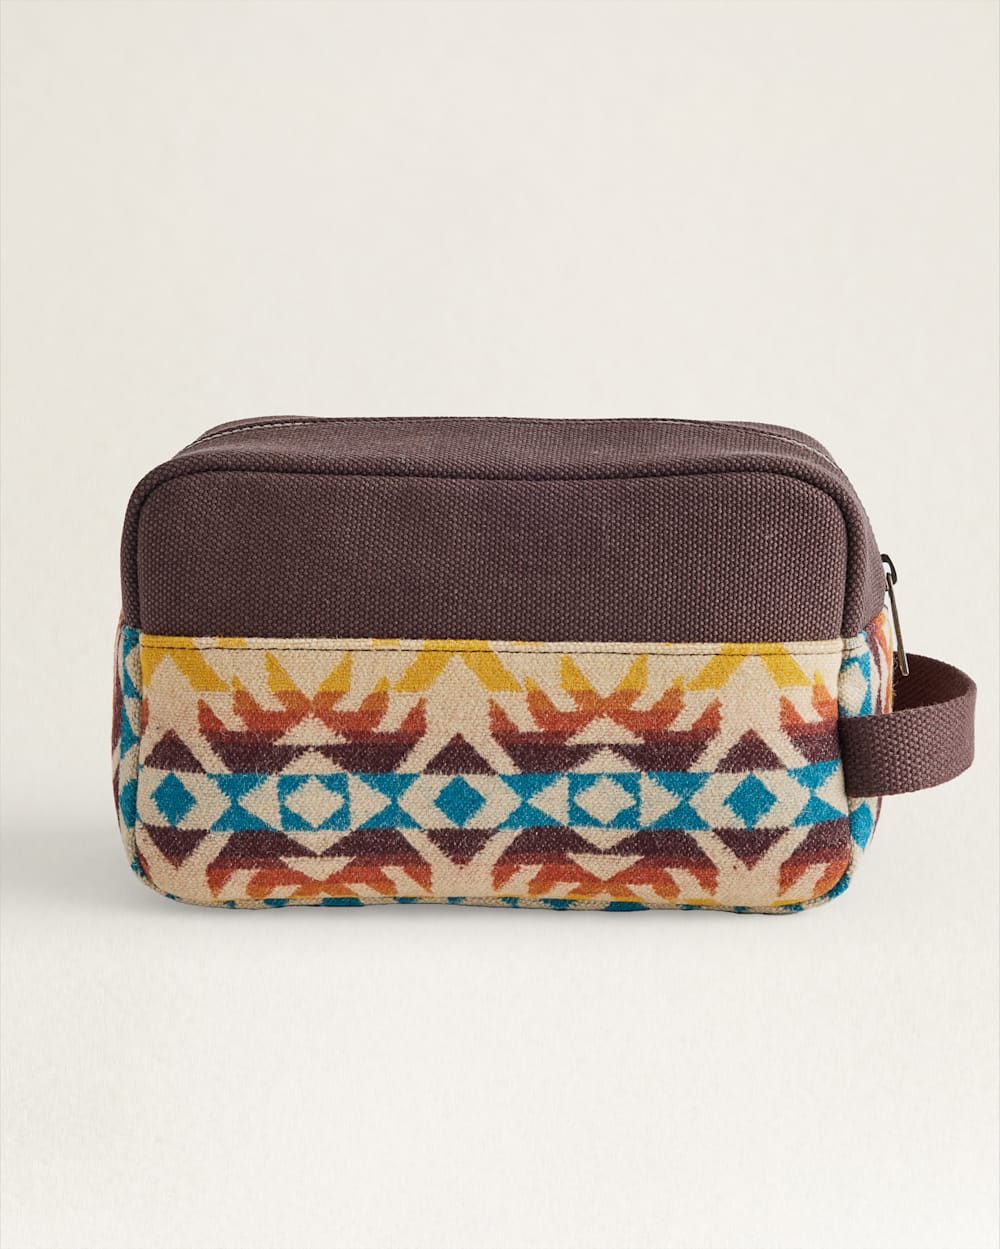 ALTERNATE VIEW OF PASCO CARRYALL POUCH IN SUNSET MULTI image number 2